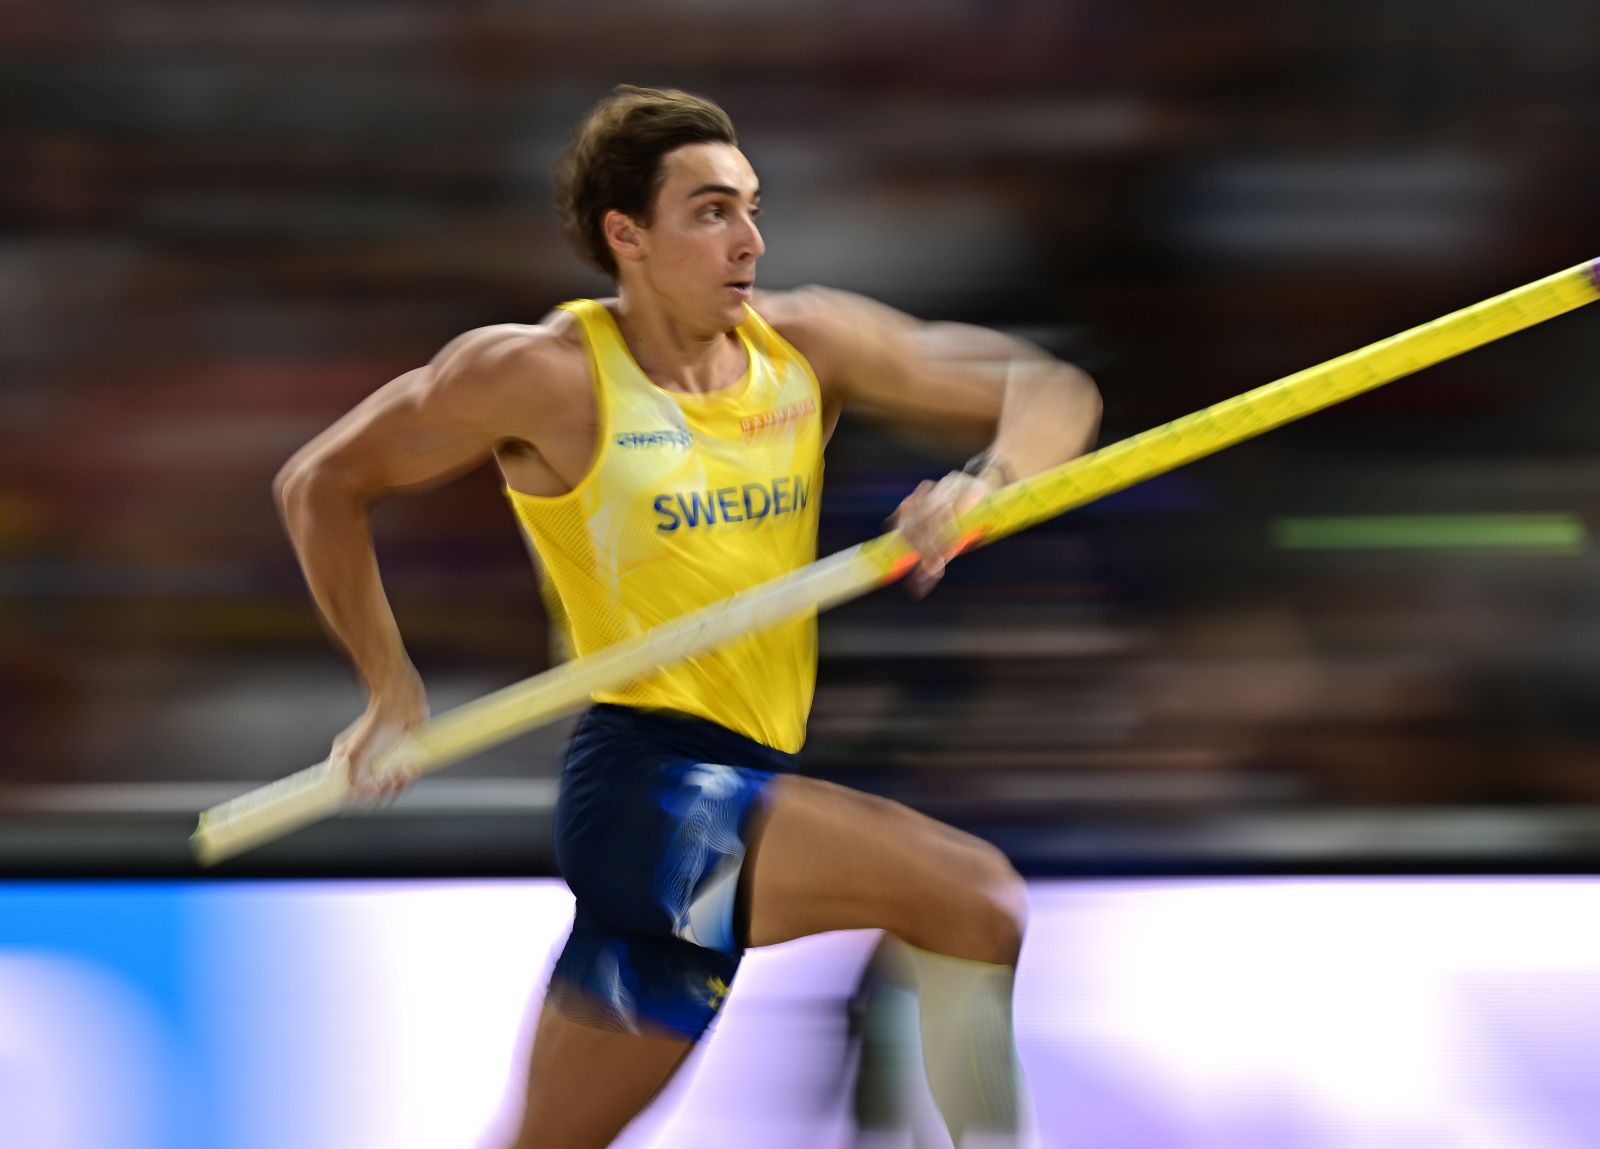 epa10822046 Armand Duplantis of Sweden in action during the Pole Vault Men final competition of the World Athletics Championships in Budapest, Hungary, 26 August 2023.  EPA/CHRISTIAN BRUNA